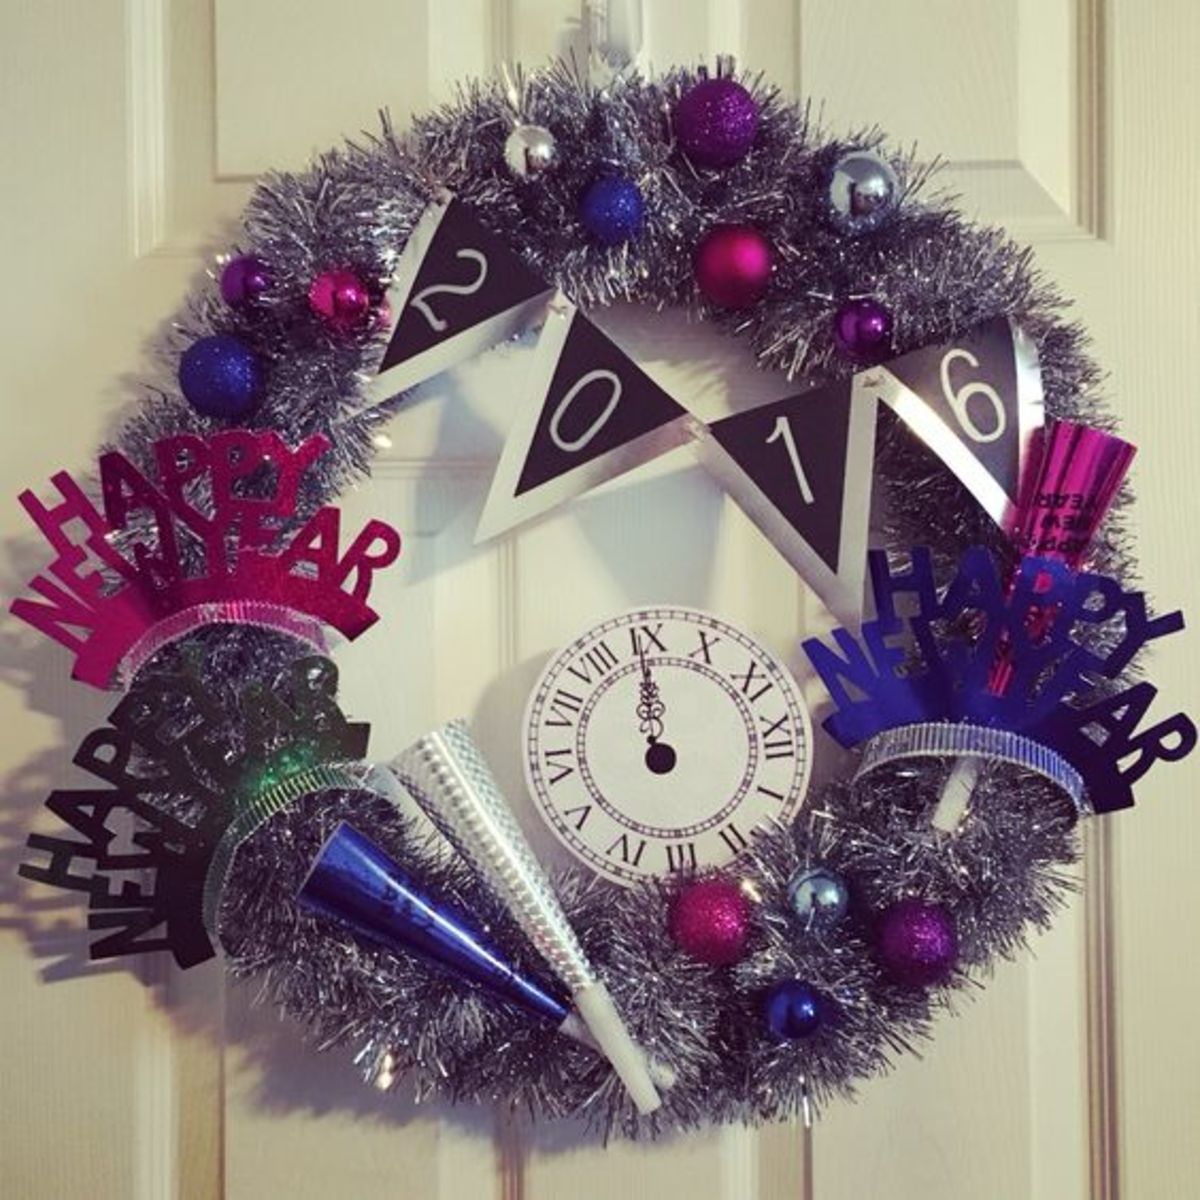 New Years wreath - use garland and ornaments,  New Years crowns and horns from the dollar store. A print out of a clock face .